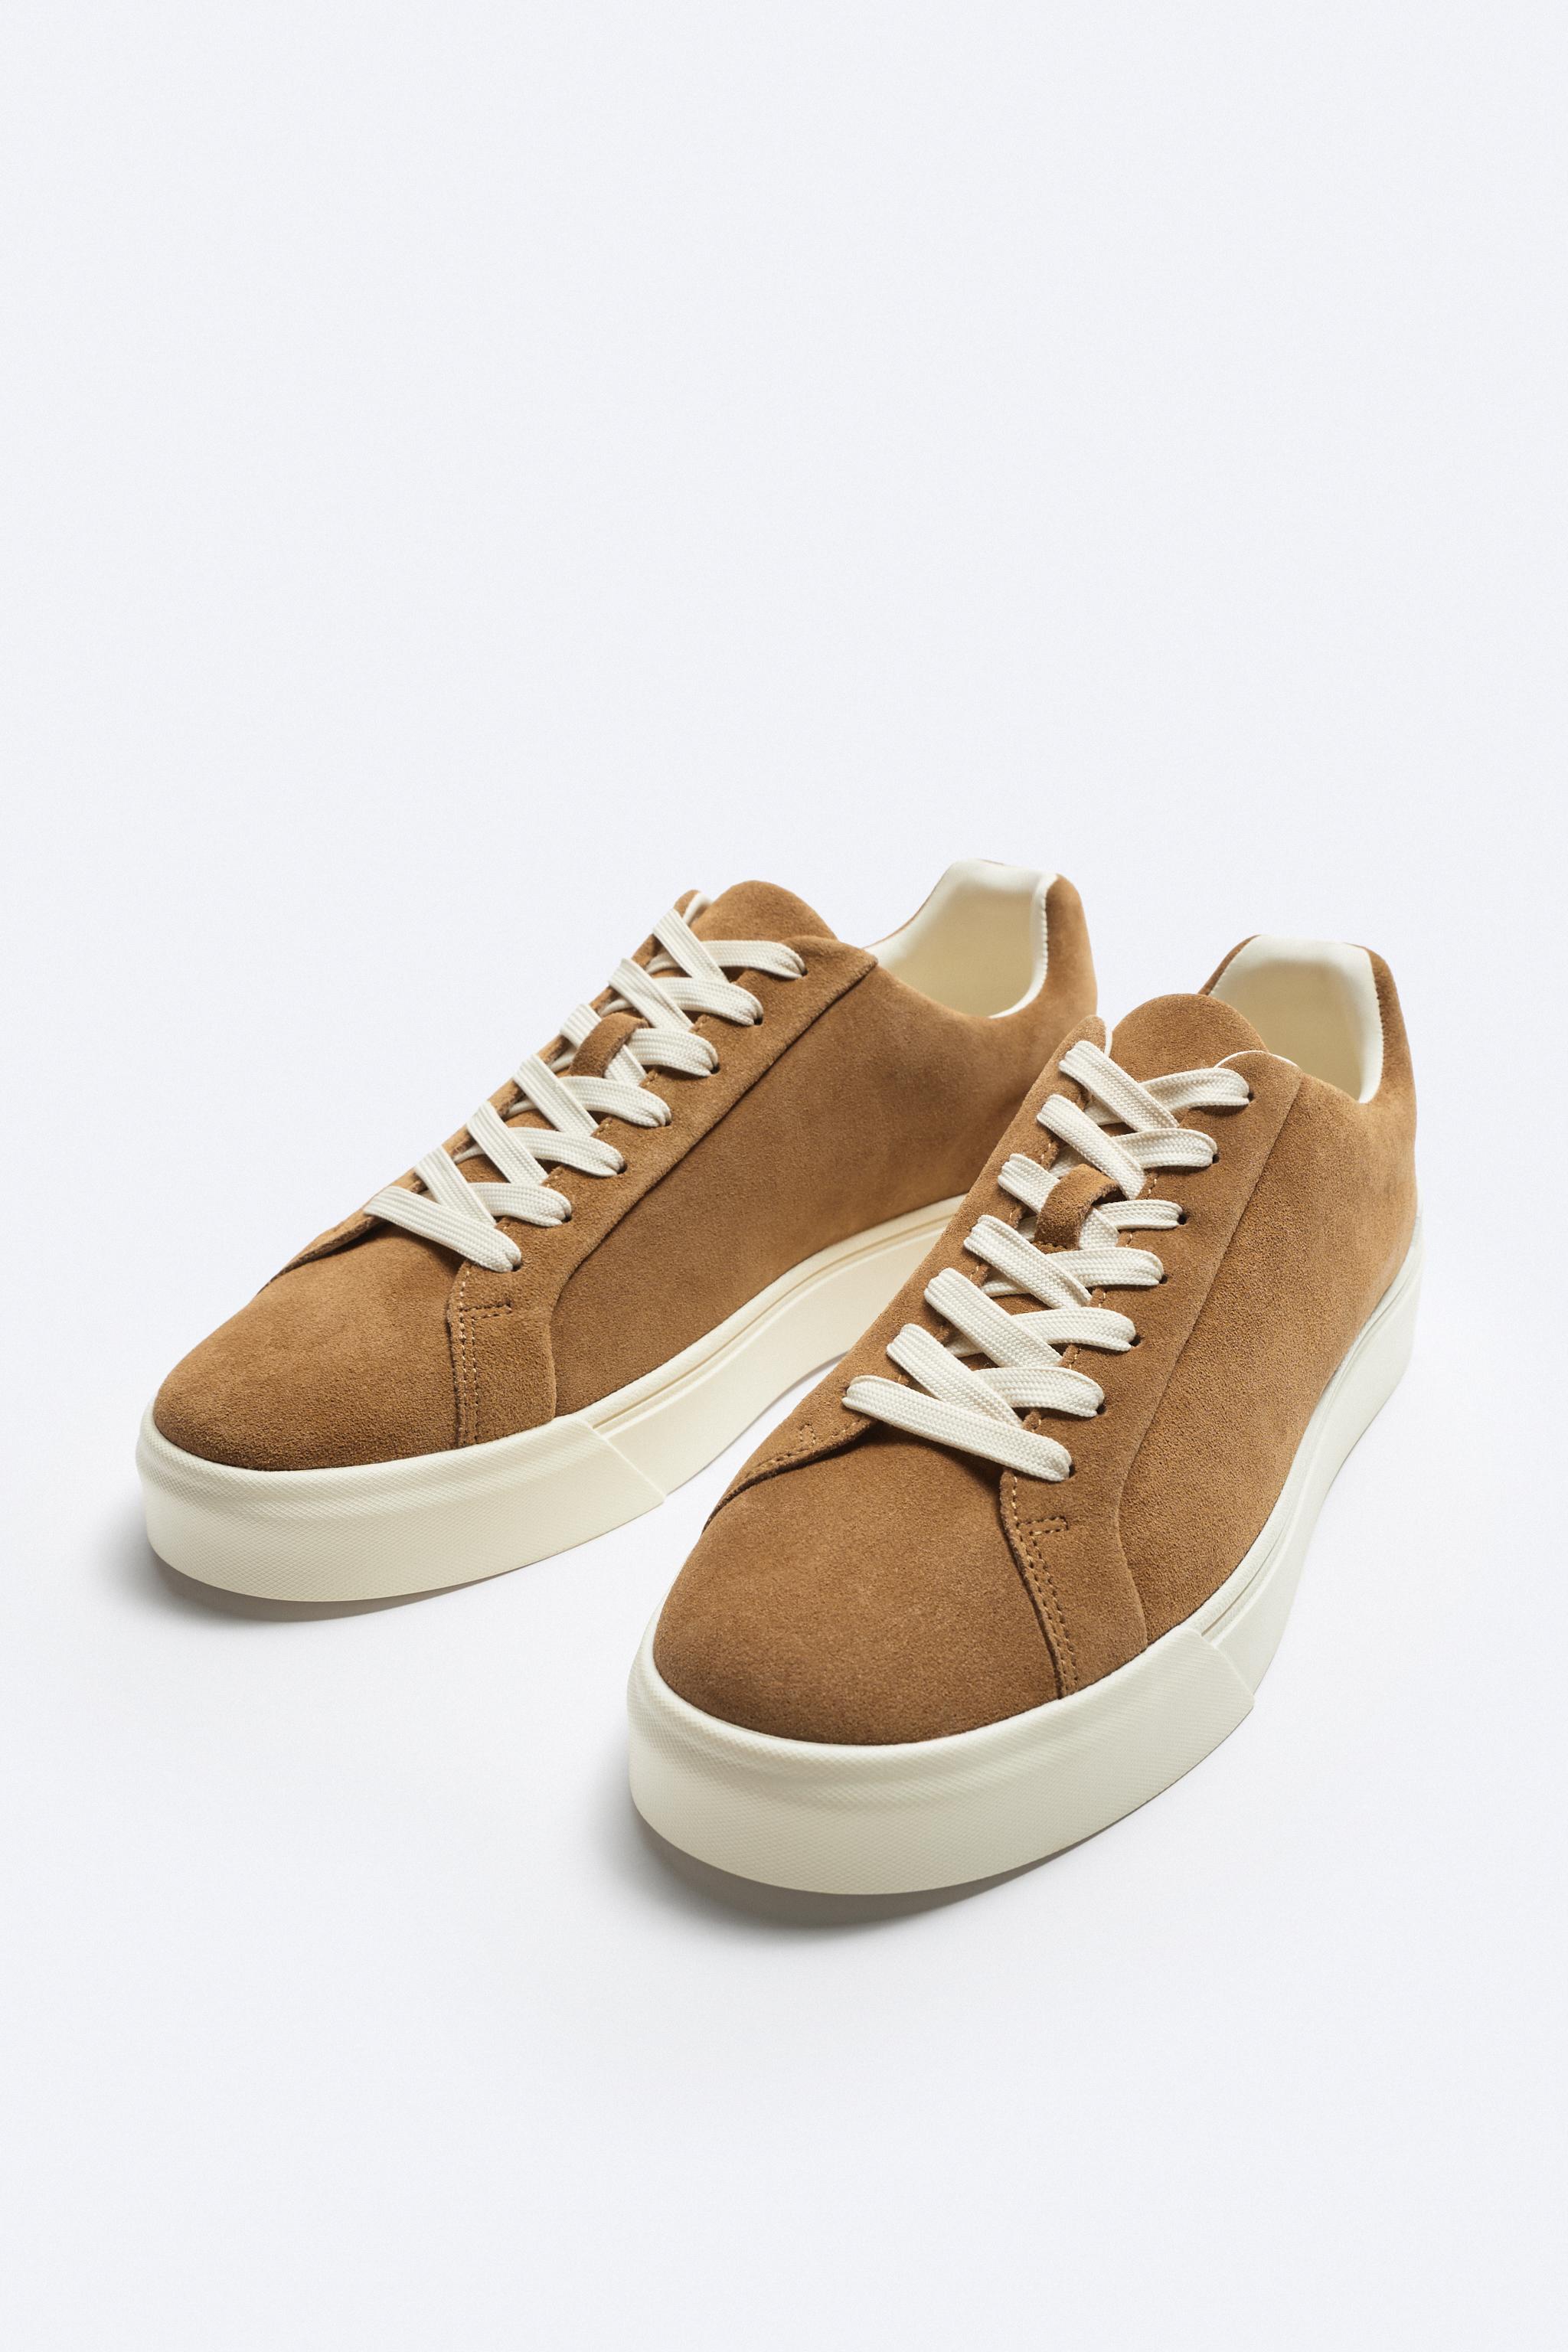 SUEDE SNEAKERS - Taupe Gray | ZARA United States